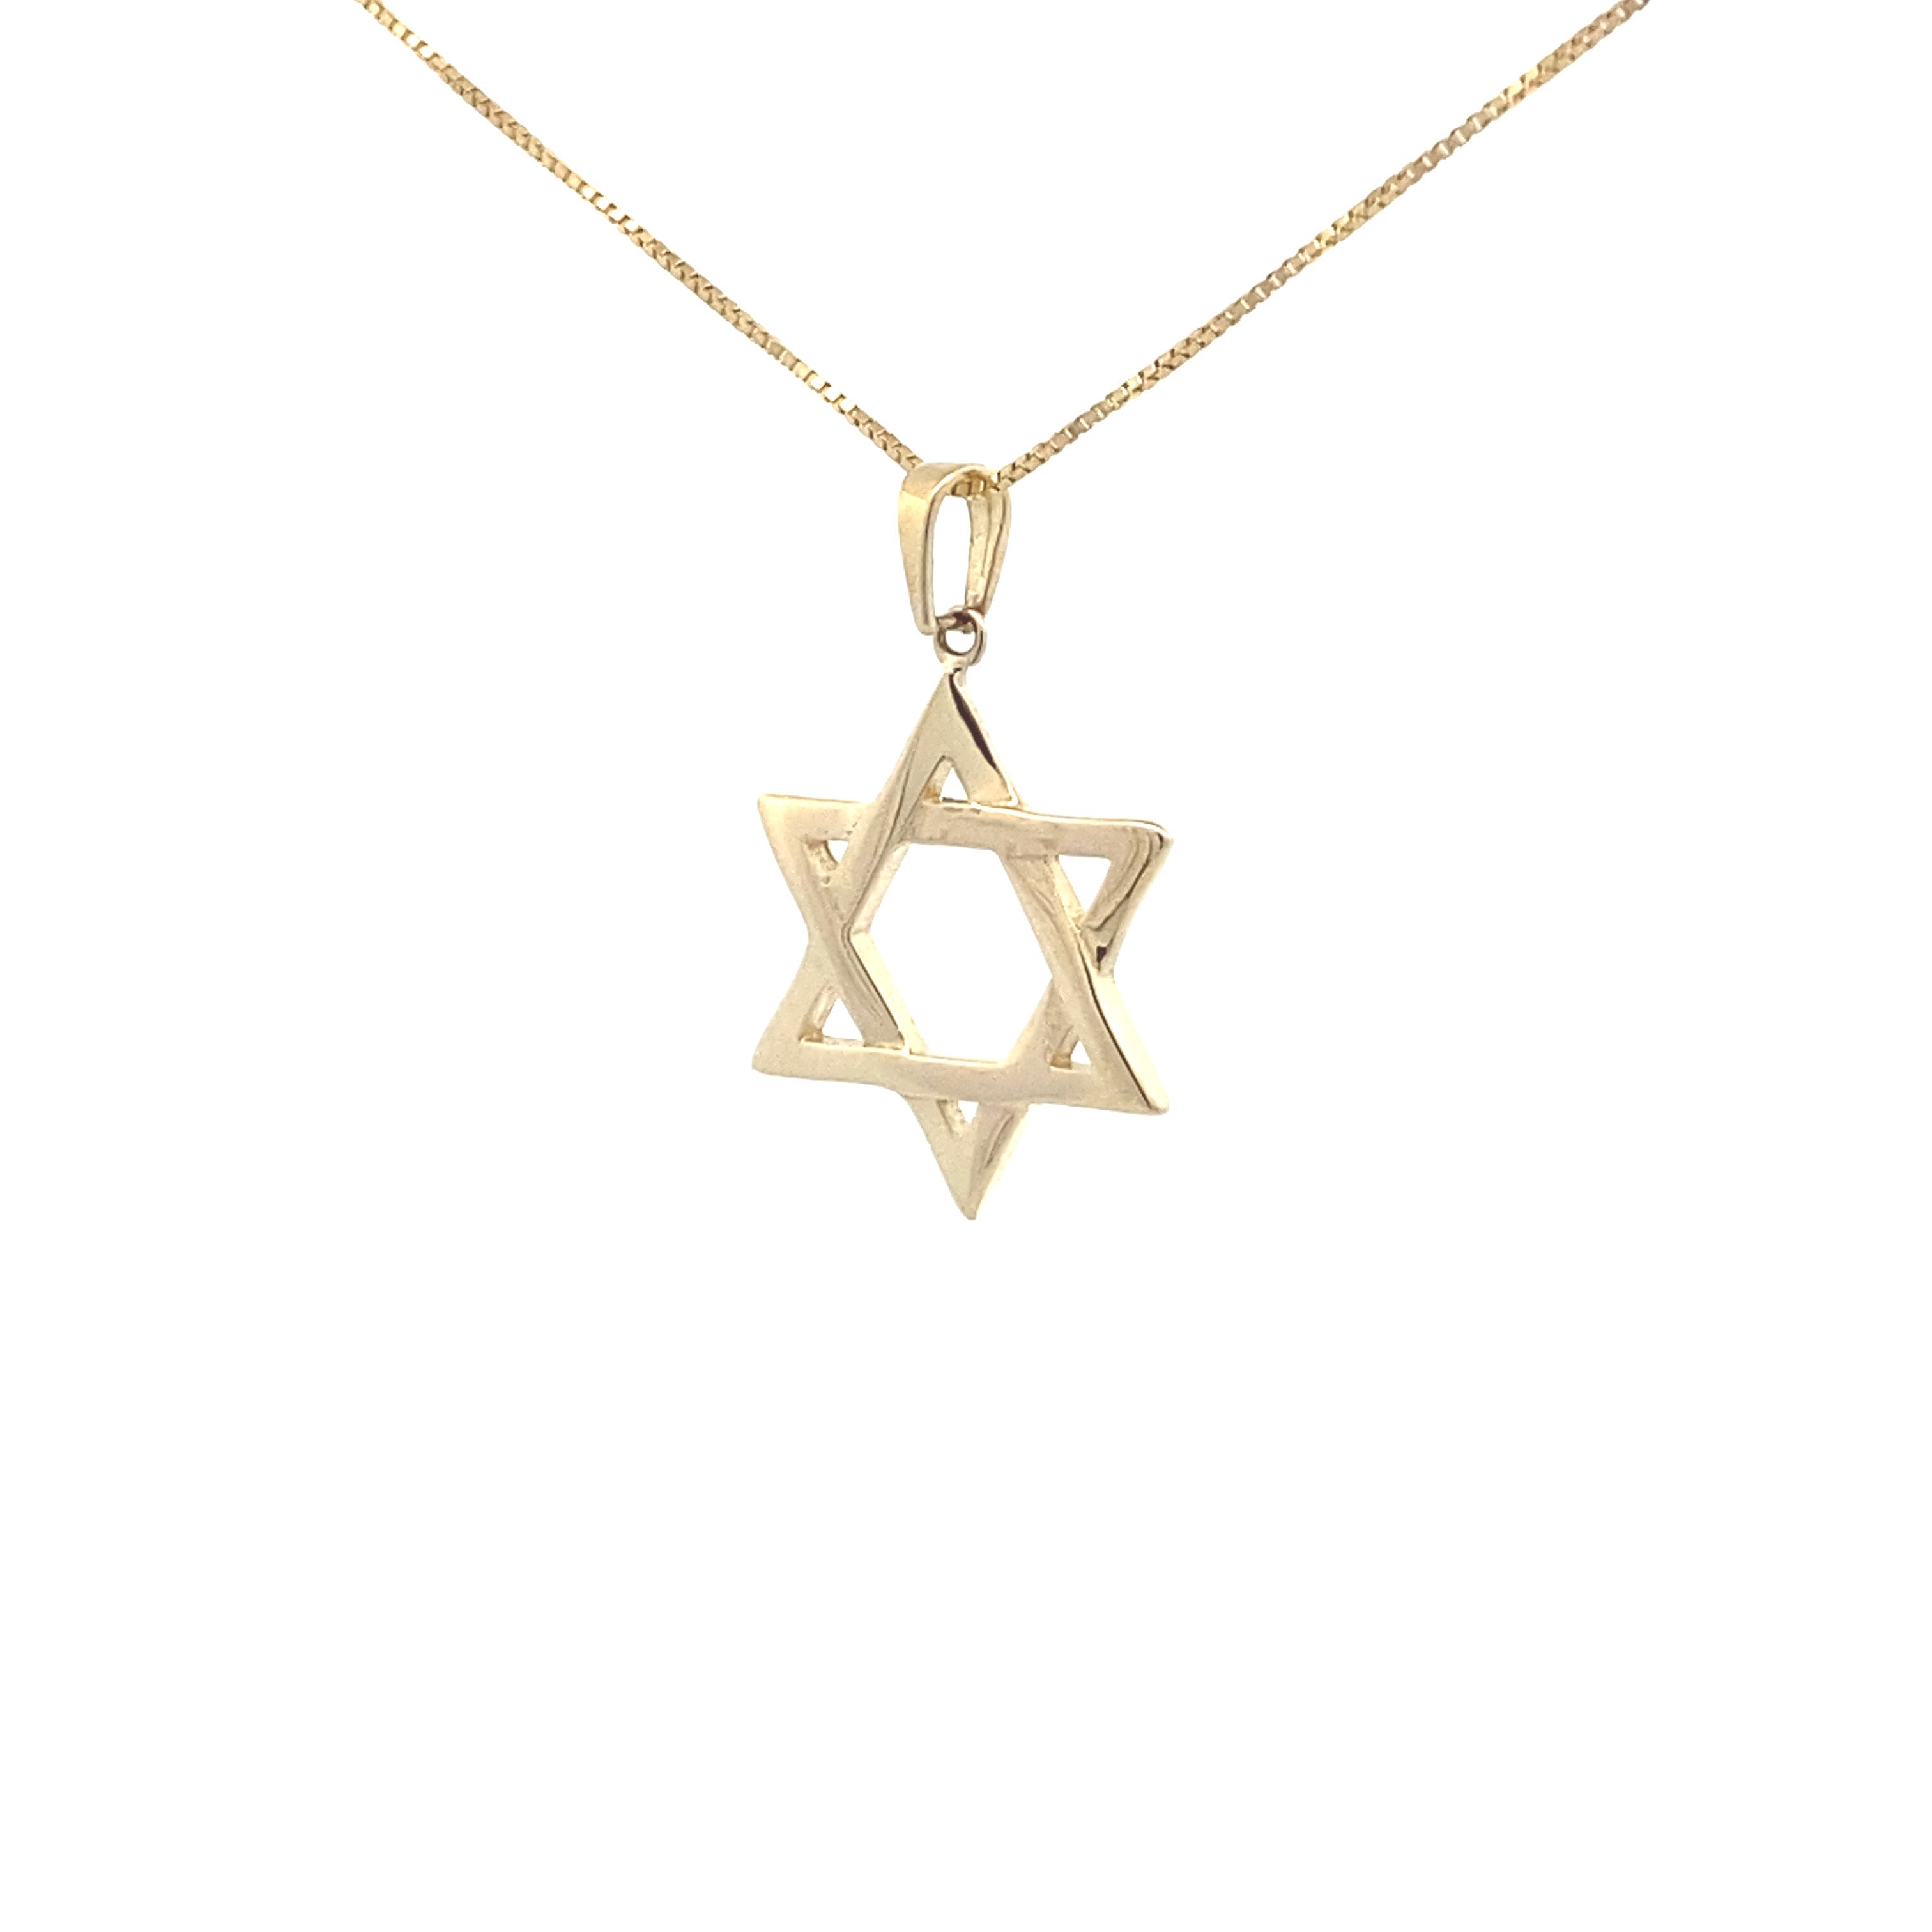 10K Yellow Gold Star of David Pendant Necklace